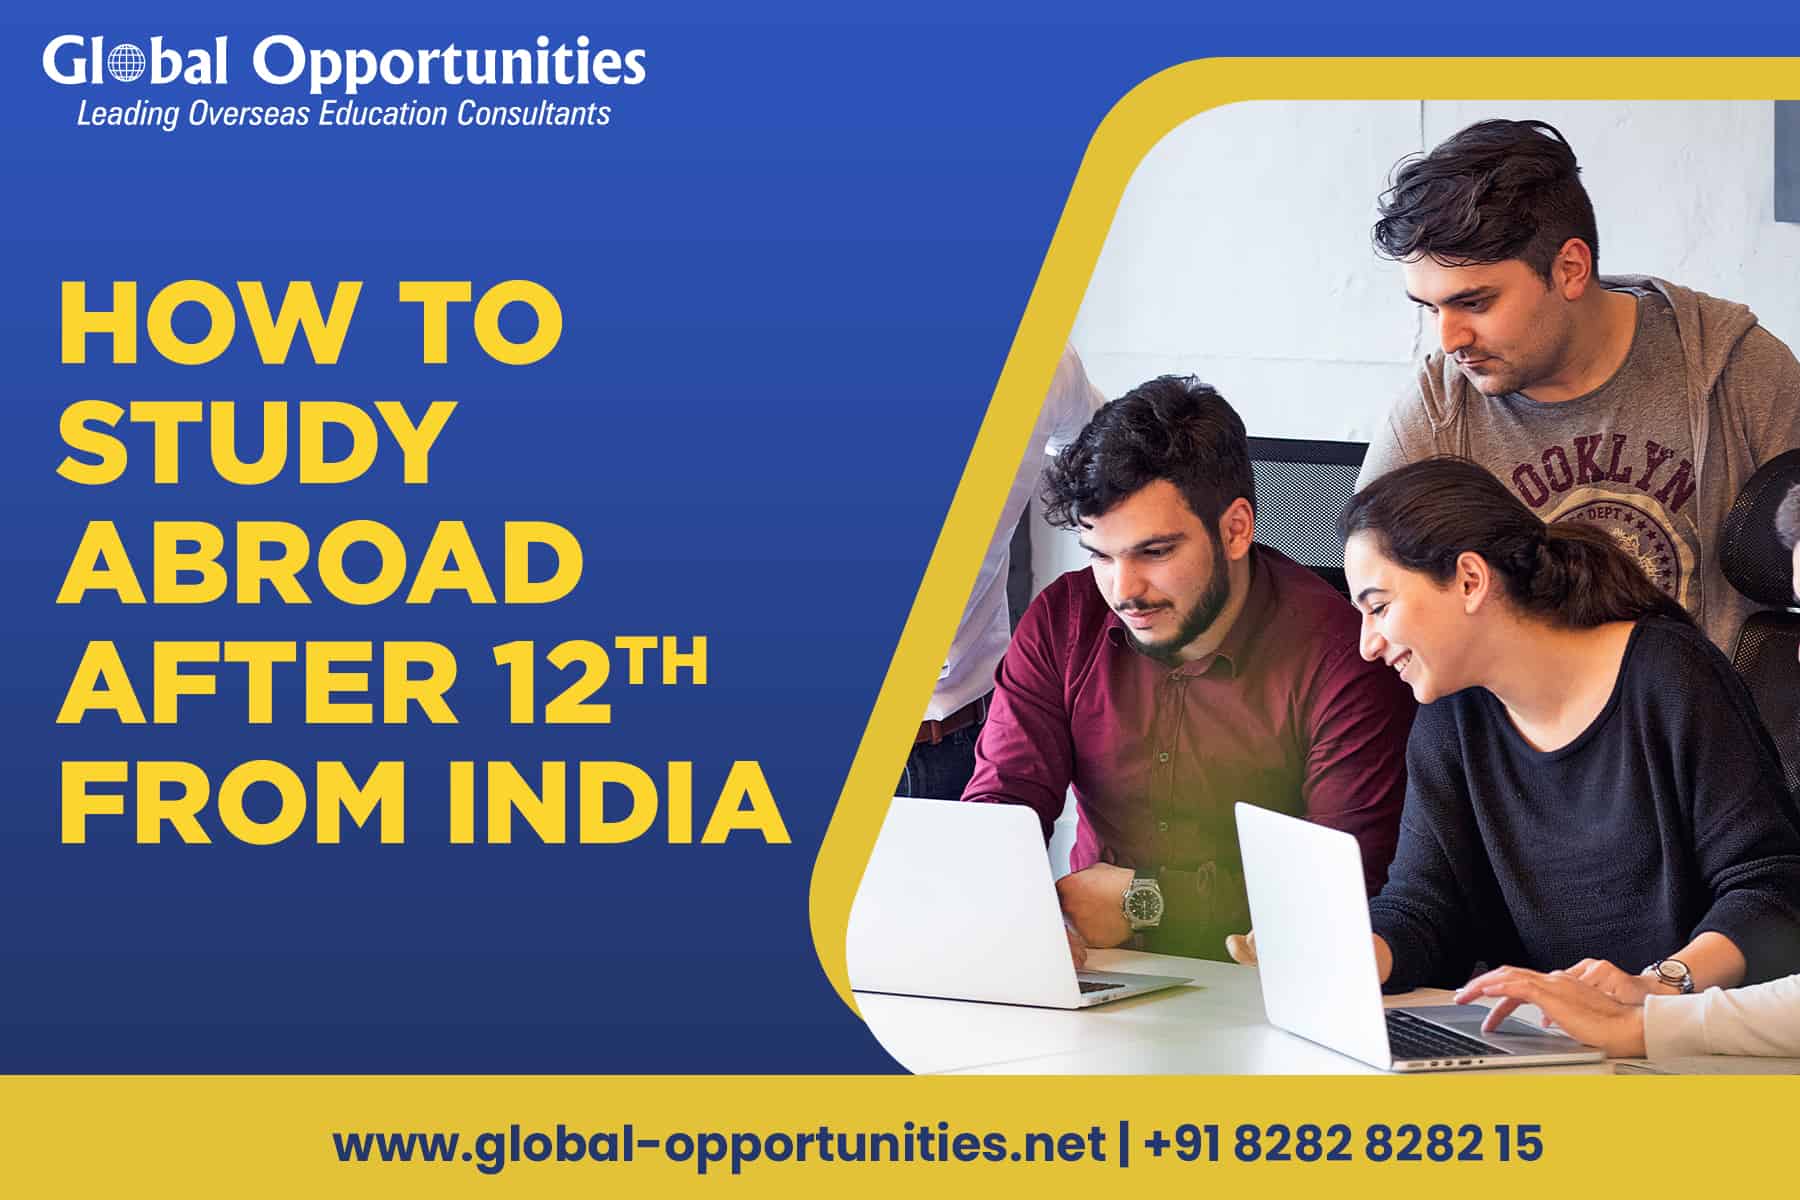 How to Study Abroad After 12th From India?